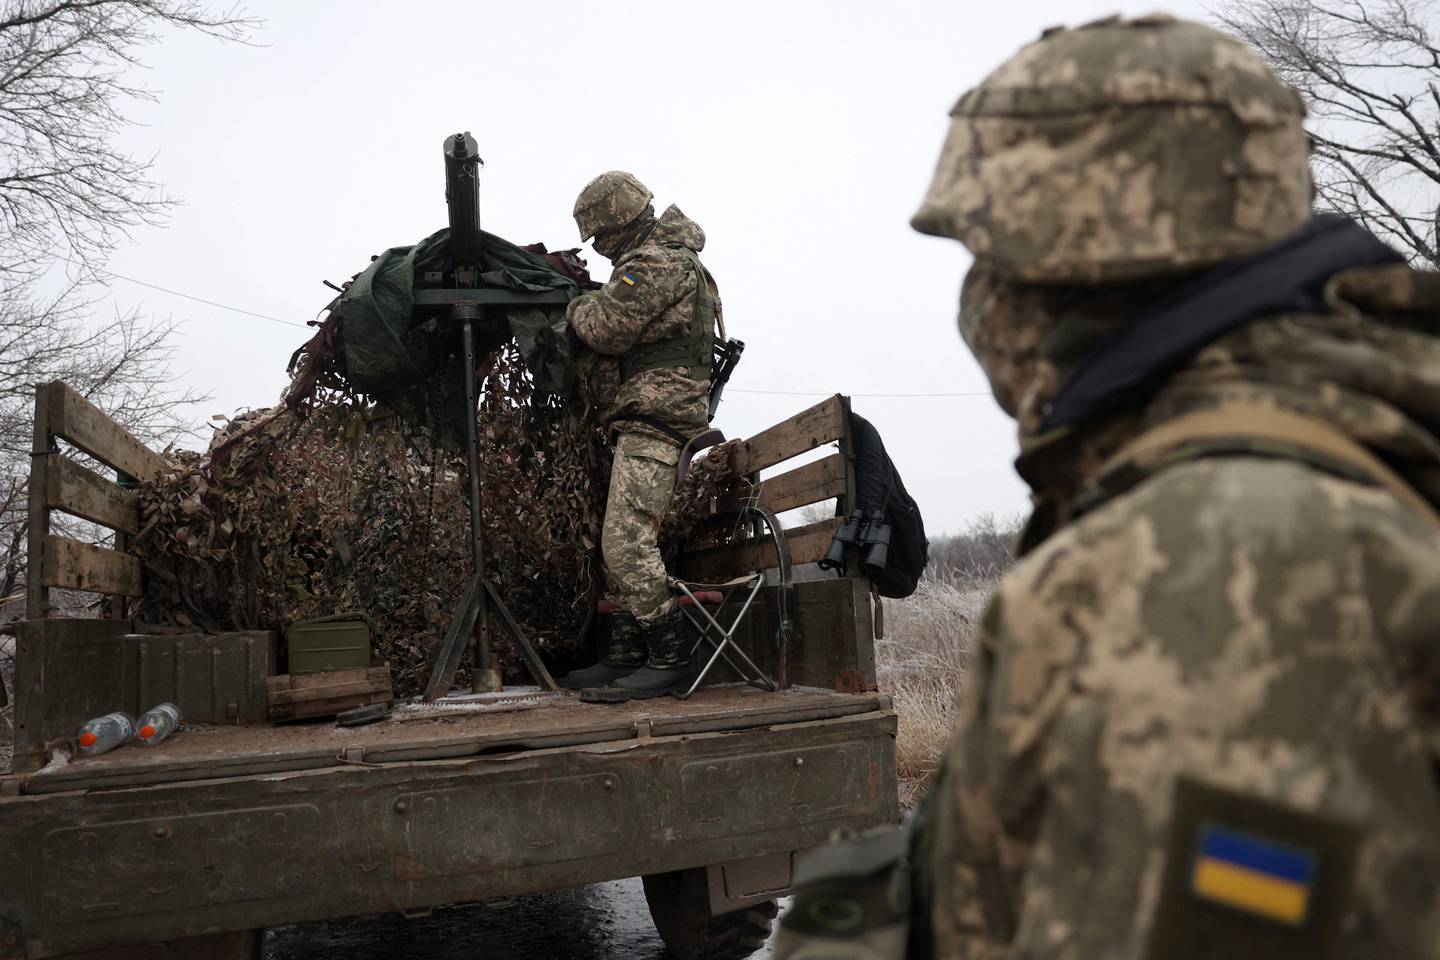 Ukrainian soldiers stand at their position in the Donetsk region, on December 10, 2023, amid the Russian invasion of Ukraine. (Photo by Anatolii Stepanov / AFP)